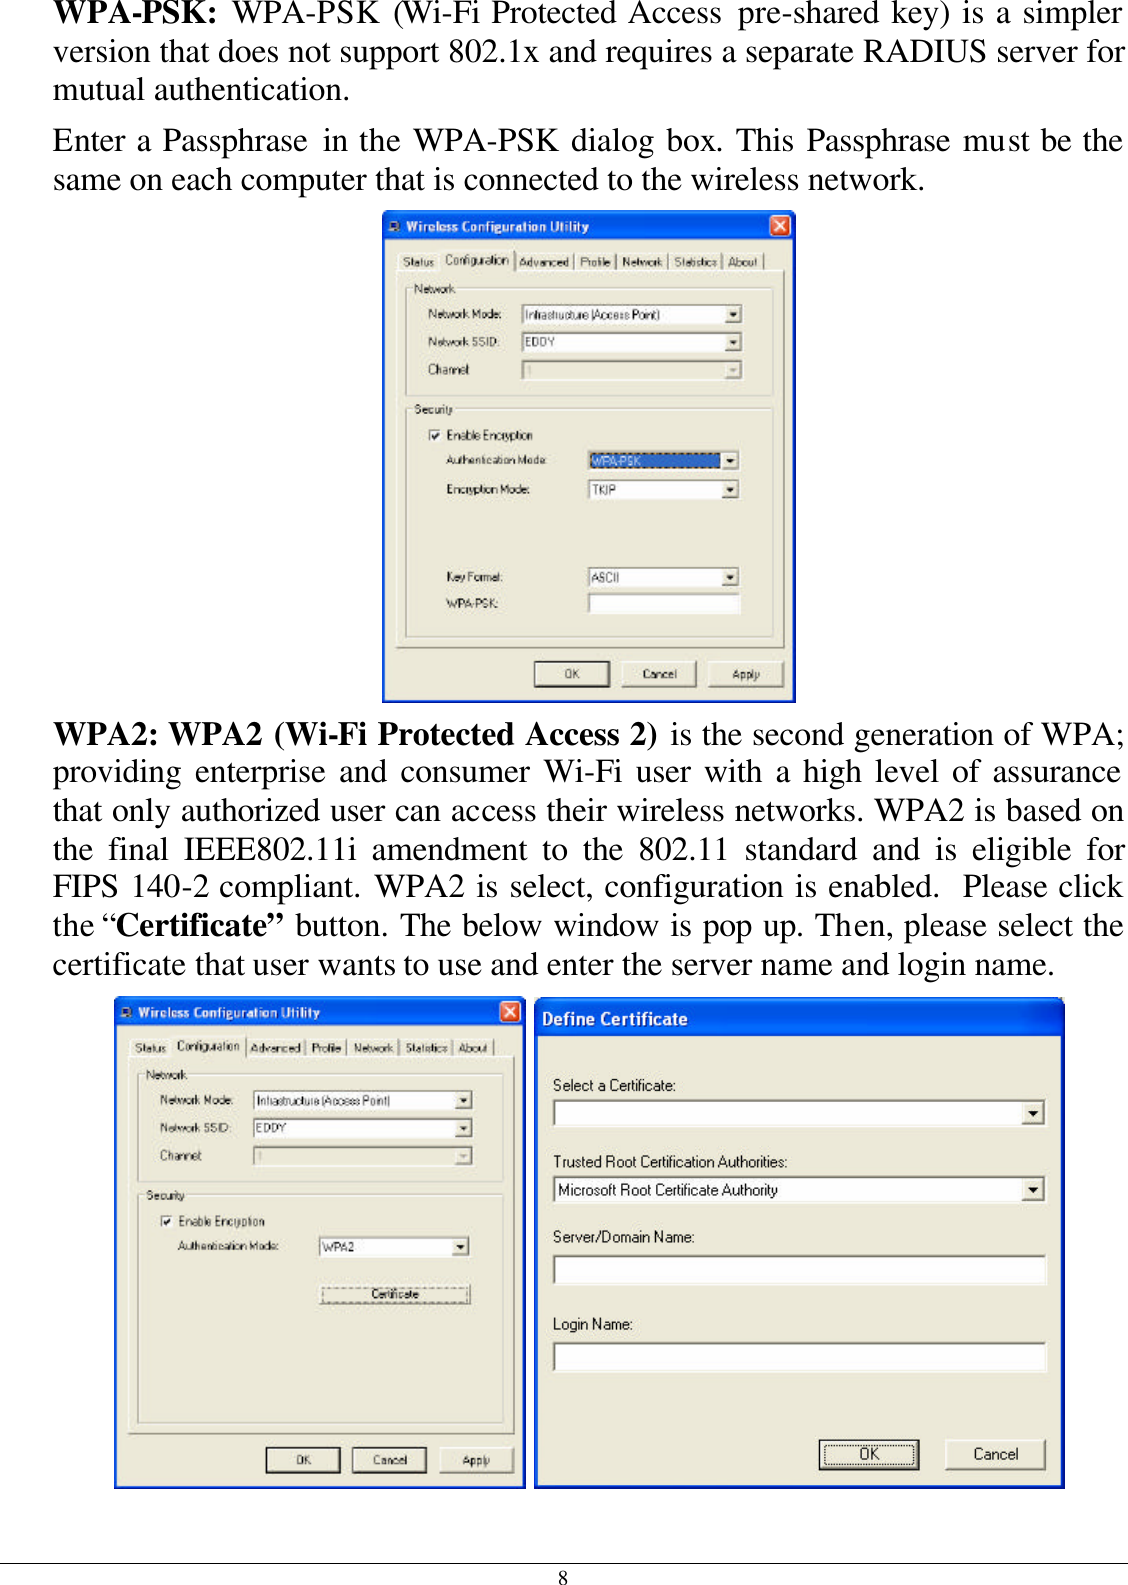 8 WPA-PSK:  WPA-PSK (Wi-Fi Protected Access pre-shared key) is a simpler version that does not support 802.1x and requires a separate RADIUS server for mutual authentication. Enter a Passphrase in the WPA-PSK dialog box. This Passphrase must be the same on each computer that is connected to the wireless network.  WPA2: WPA2 (Wi-Fi Protected Access 2) is the second generation of WPA; providing enterprise and consumer Wi-Fi user with a high level of assurance that only authorized user can access their wireless networks. WPA2 is based on the final IEEE802.11i amendment to the 802.11 standard and is eligible for FIPS 140-2 compliant. WPA2 is select, configuration is enabled.  Please click the “Certificate” button. The below window is pop up. Then, please select the certificate that user wants to use and enter the server name and login name.    